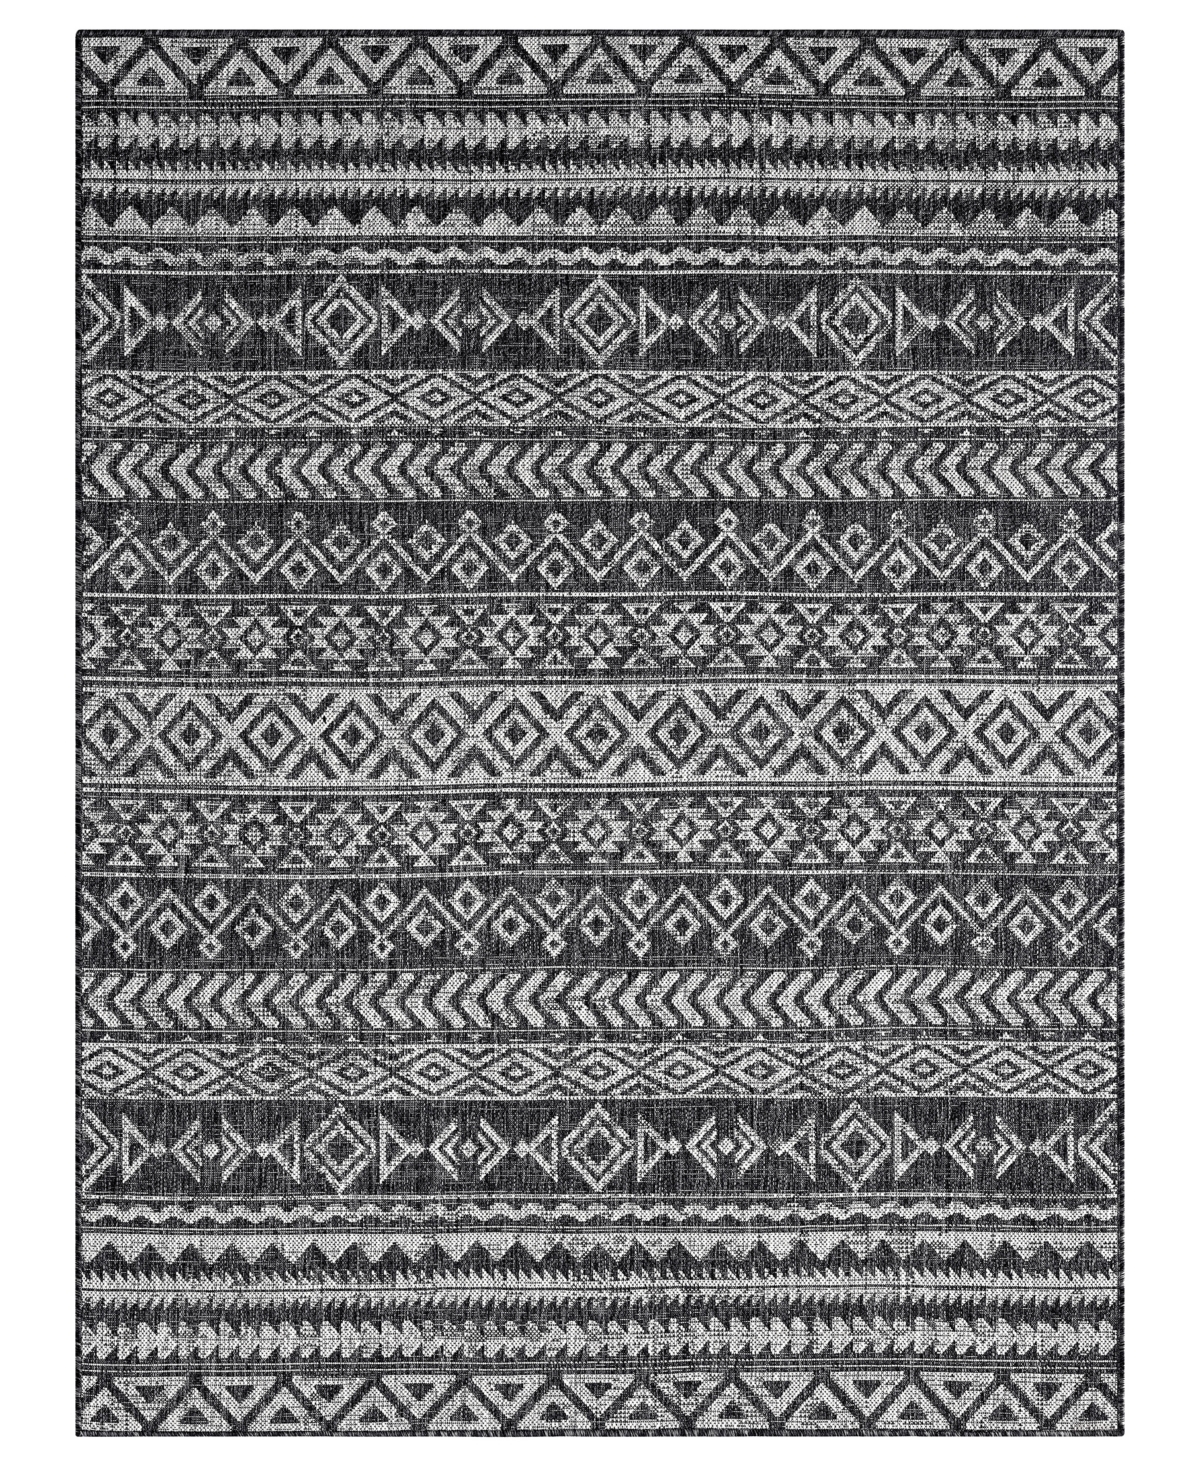 Nicole Miller Patio Country Odina 7'9" X 10'2" Outdoor Area Rug In Black